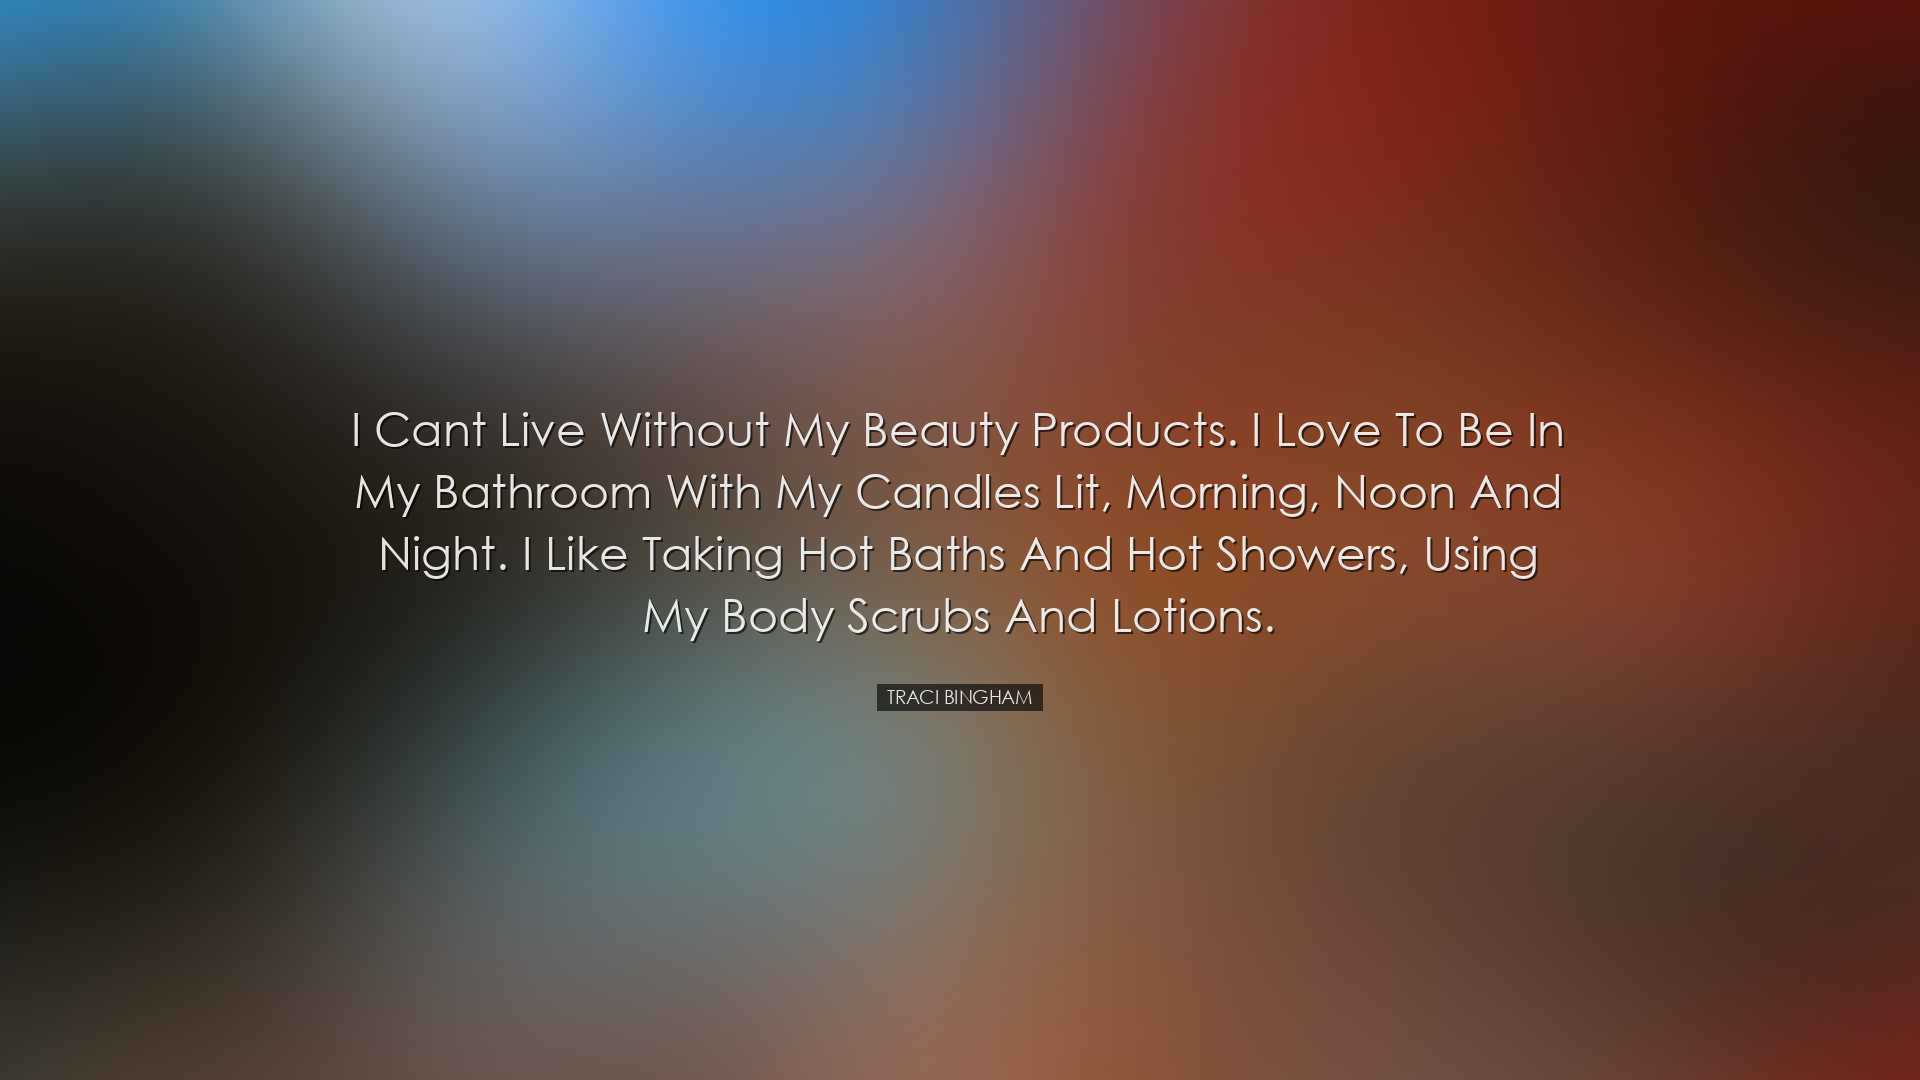 I cant live without my beauty products. I love to be in my bathroo